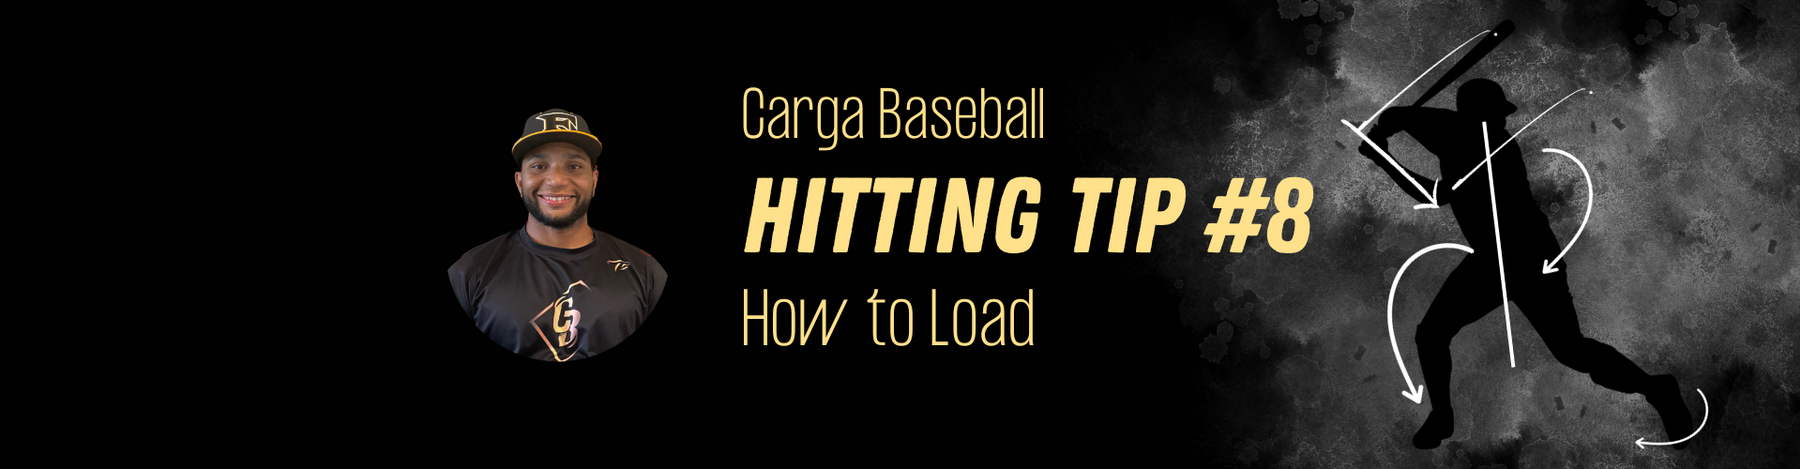 Hitting Tips from Carlos #8: How to Load